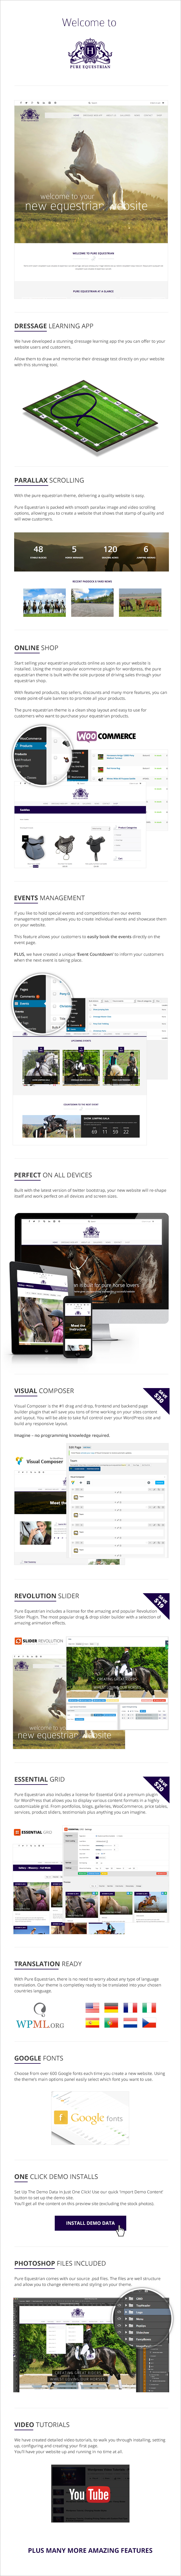 Pure Equestrian - Horse And Stable Yard Management WordPress Theme - 5